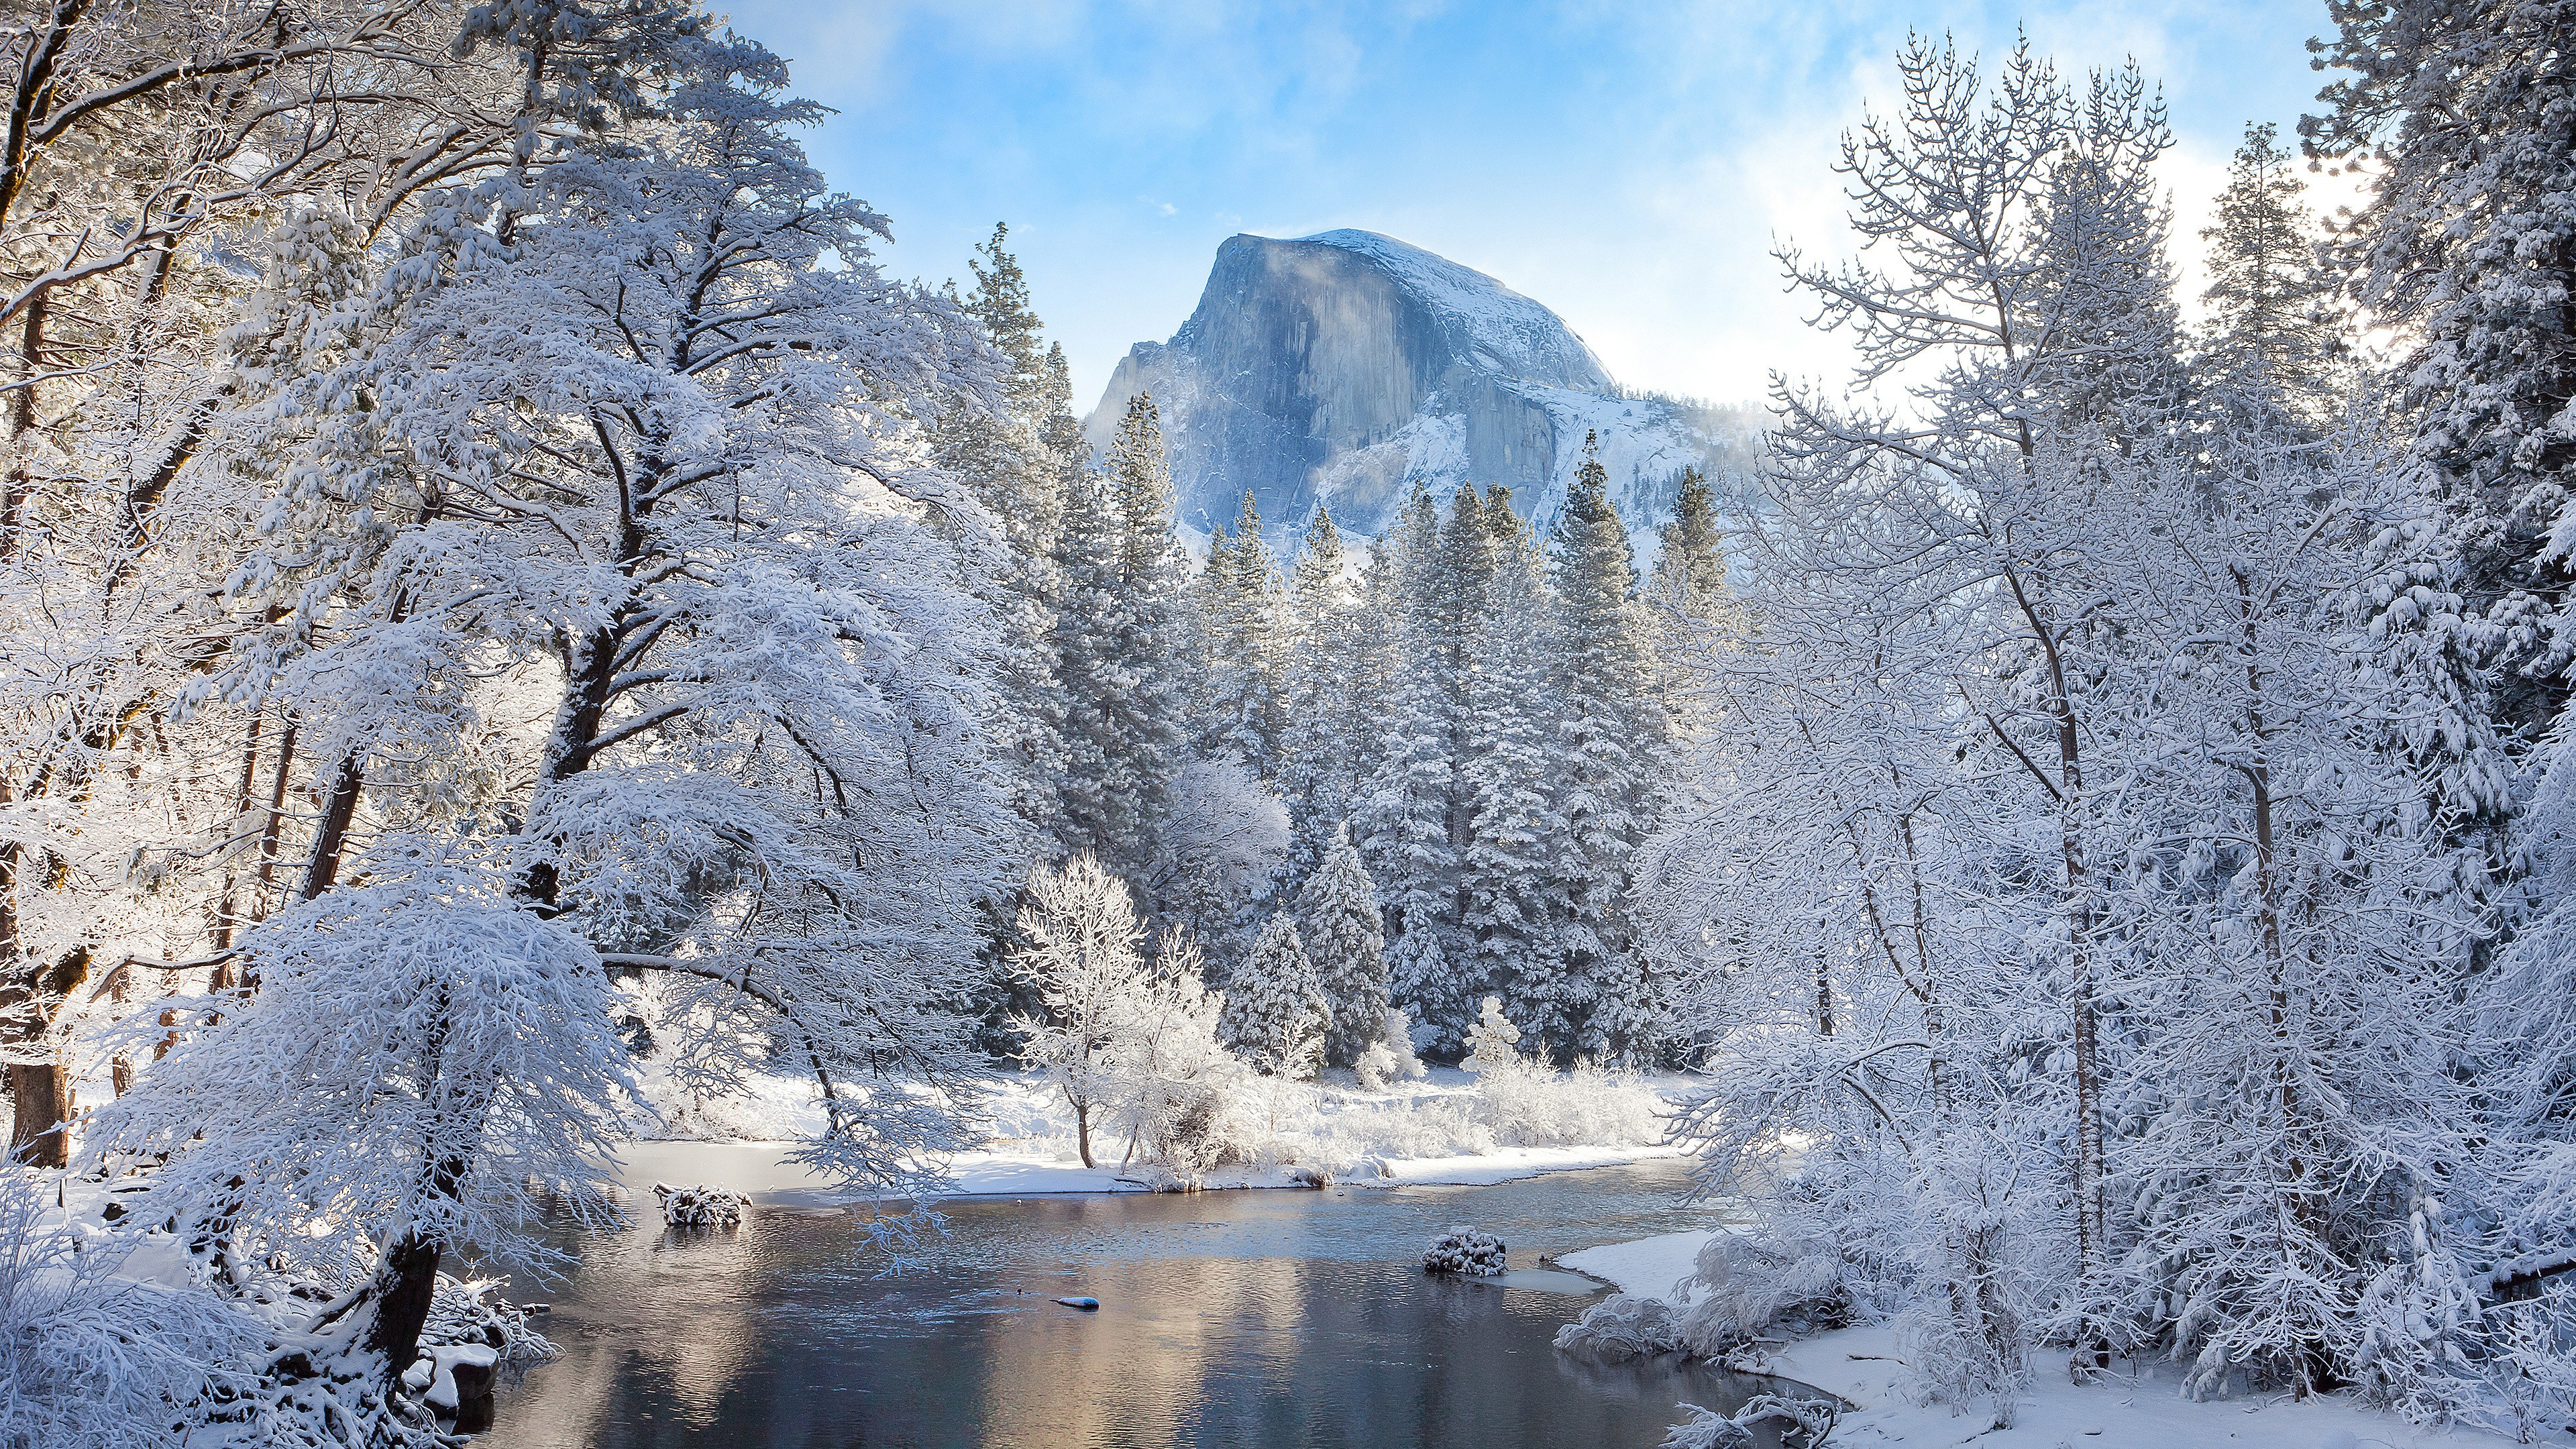 General 3840x2160 landscape nature winter river mountains snowy peak snow frost sky pine trees daylight cold